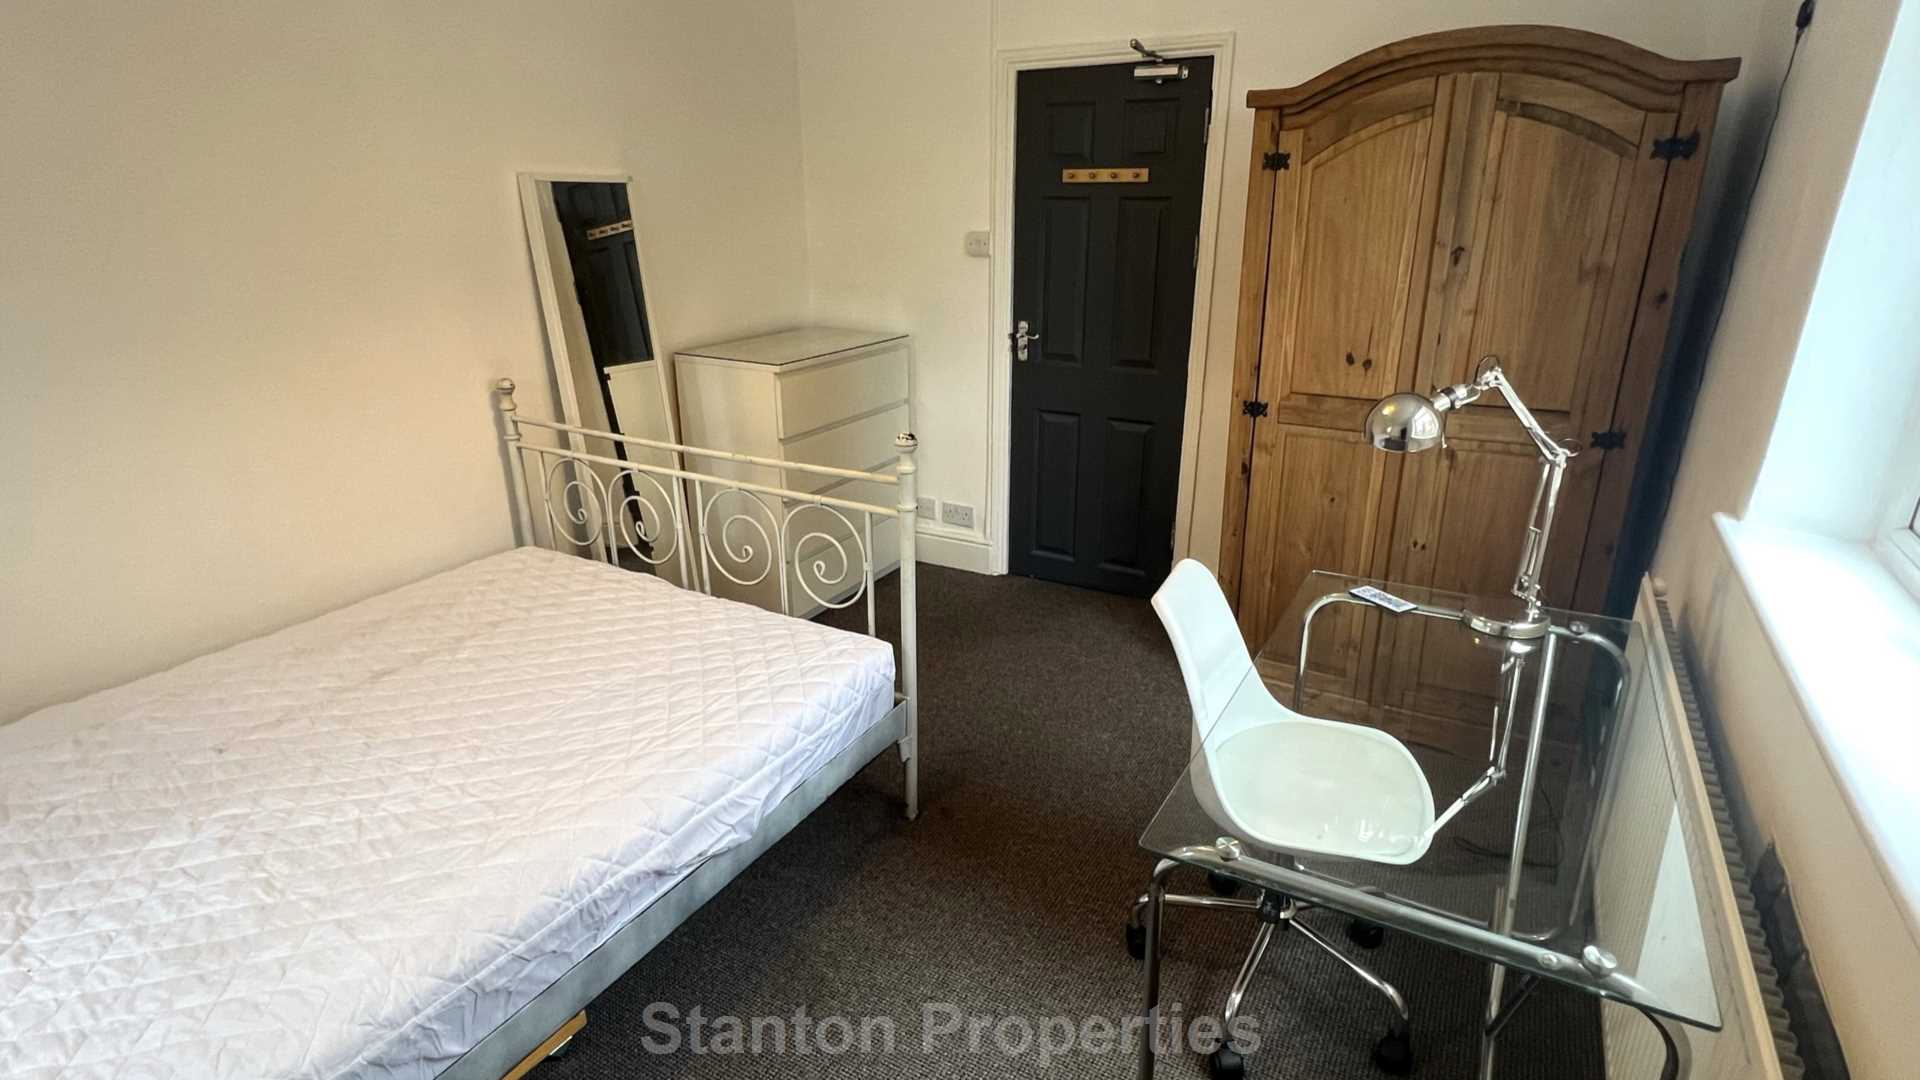 £150 PER WEEK / £650 PER MONTH, Lombard Grove, Manchester, Image 14